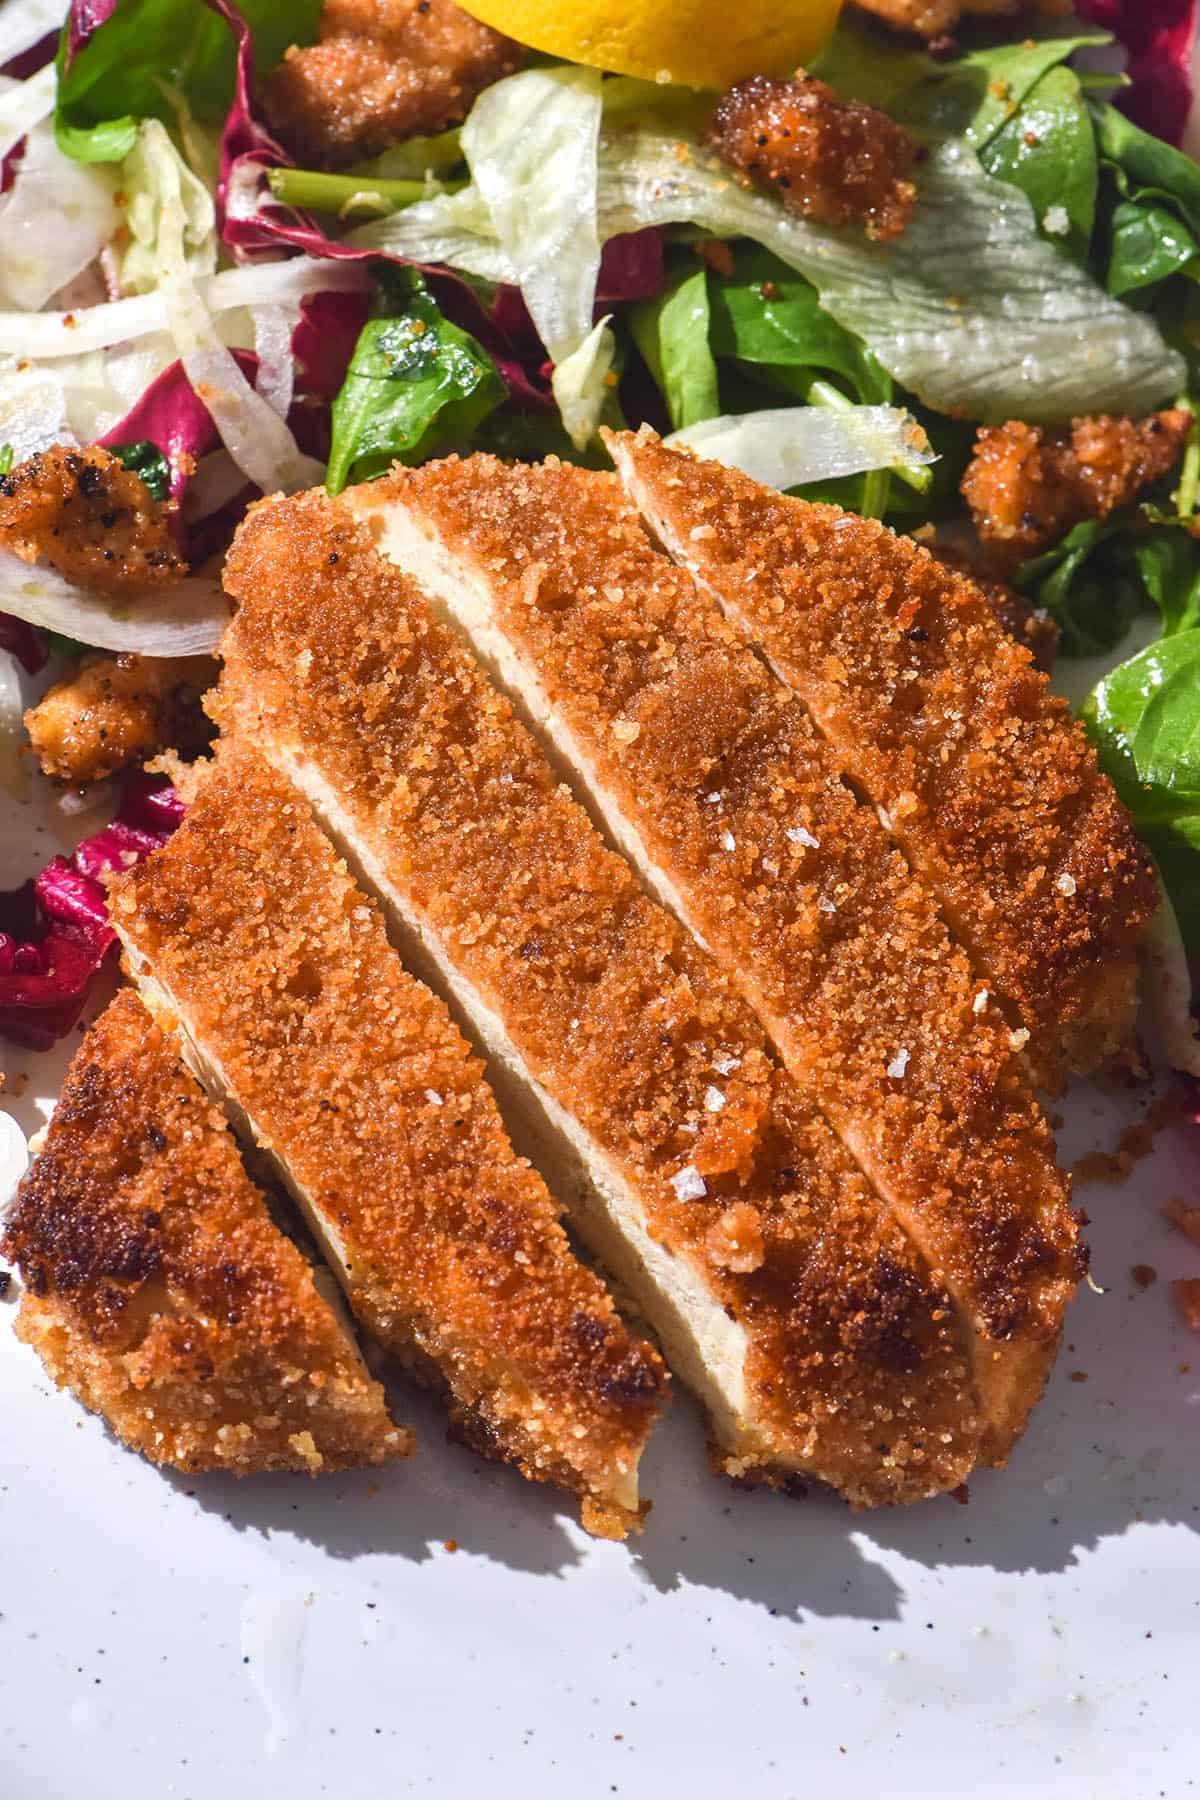 A brightly lit side on image of a gluten free vegan schnitzel sliced into fingers on a white plate. A dressed salad and lemon wedge sit in the background of the image. 